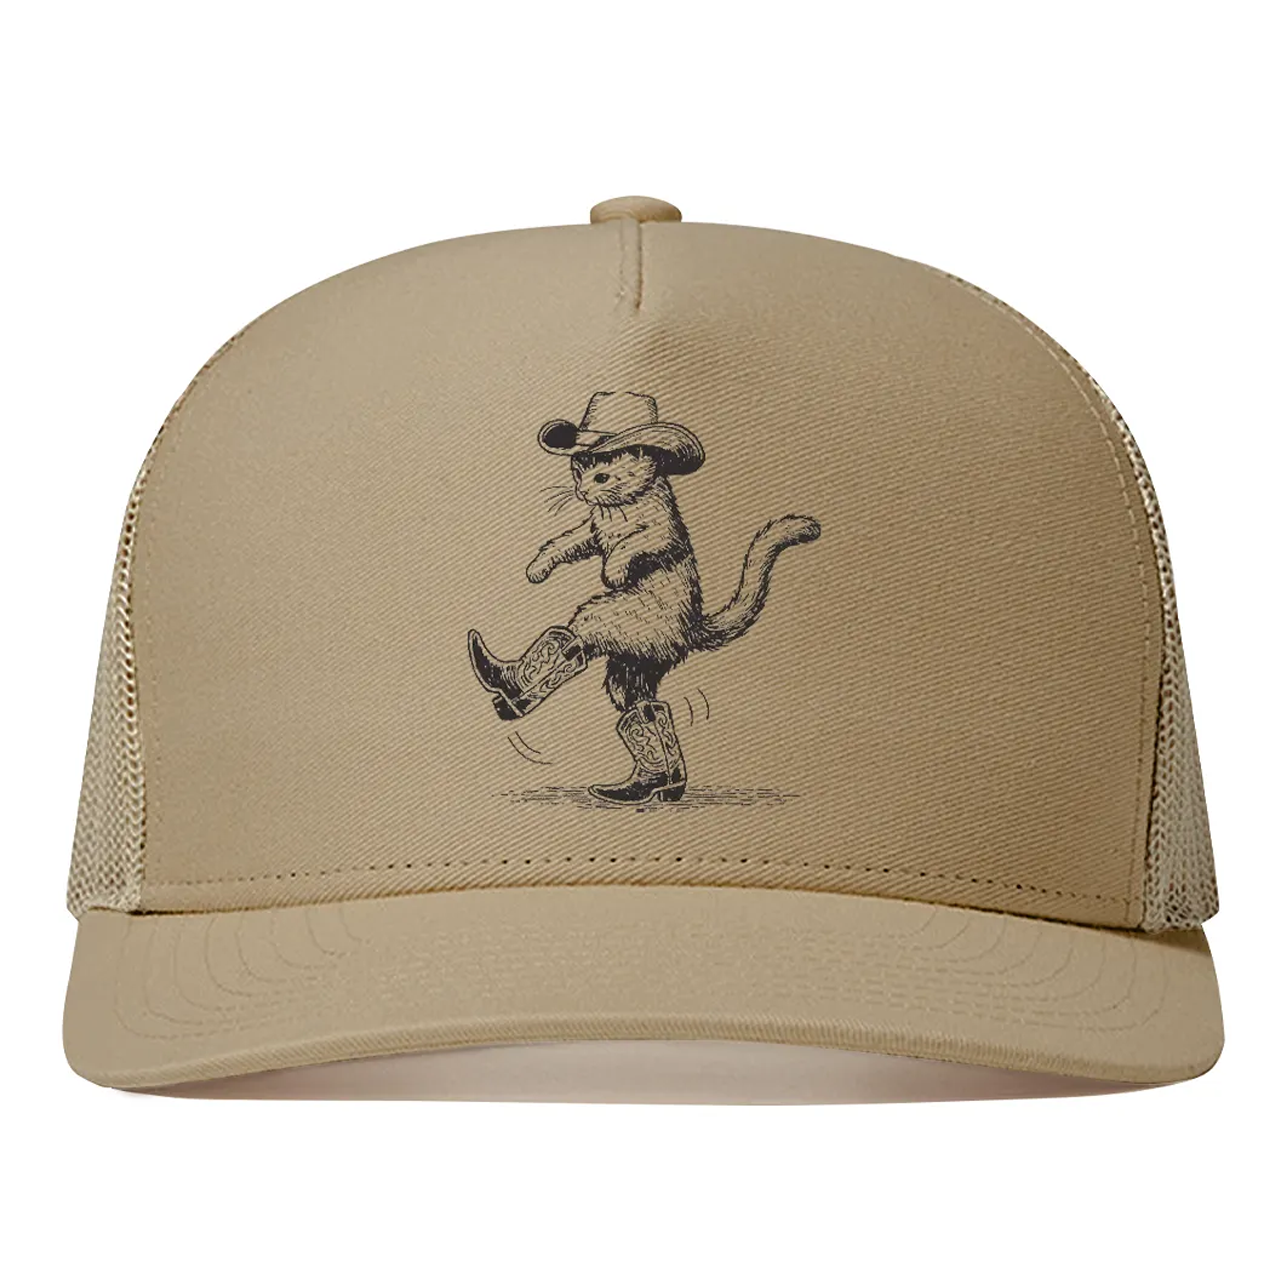 Cowboy Cat Looking for Fish Trucker Hat 